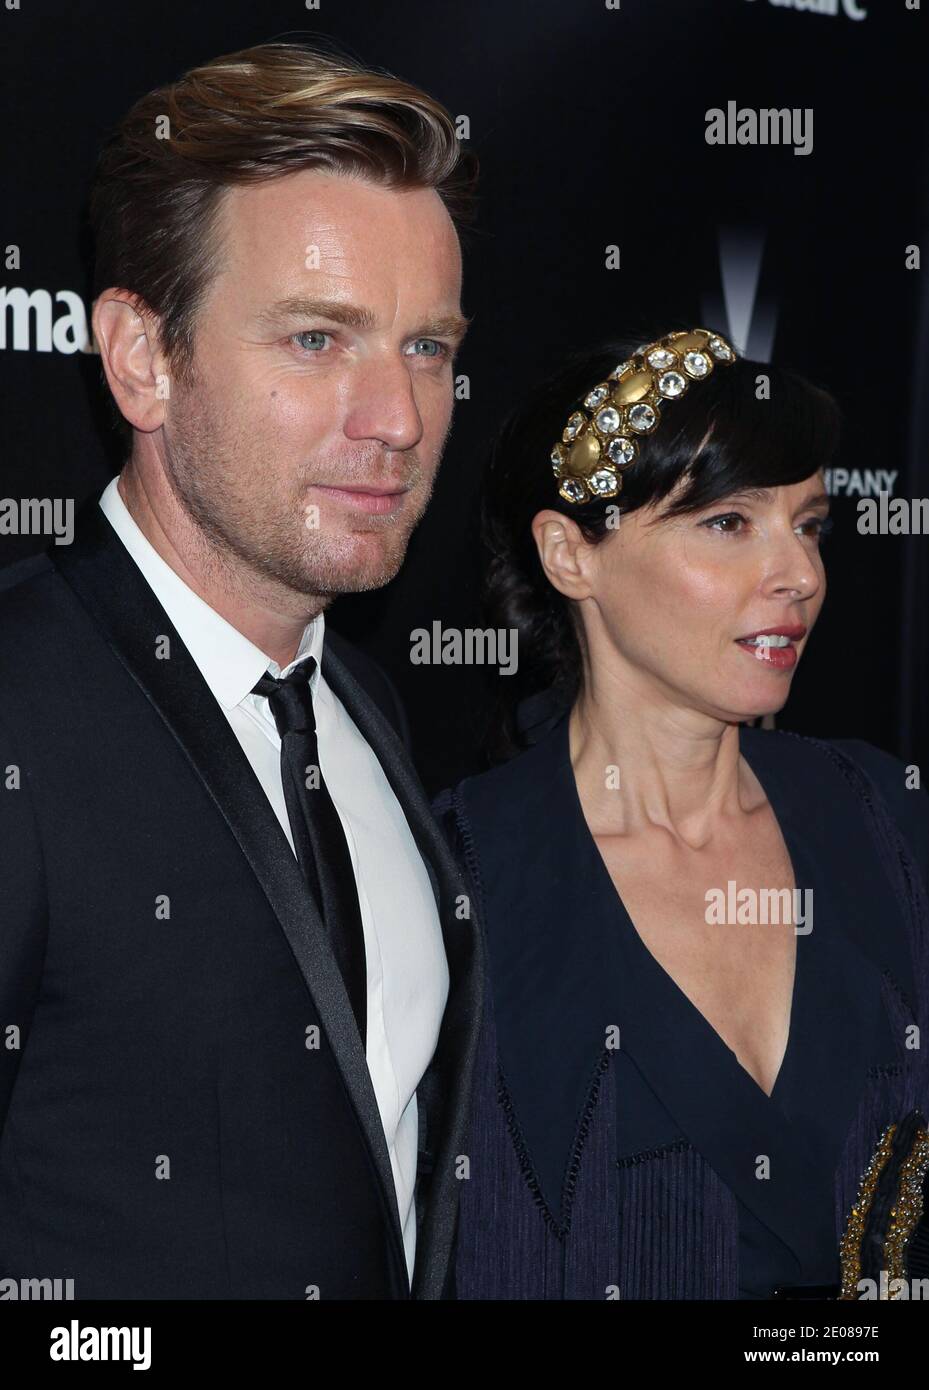 Ewan McGregor, Eve Mavrakis, The Weinstein Company's 2012 Golden Globe Awards After Party at The Beverly Hilton Hotel in Beverly Hills, California. January 15, 2012. (Pictured: Ewan McGregor, Eve Mavrakis). Photo by Baxter/ABACAPRESS.COM Stock Photo